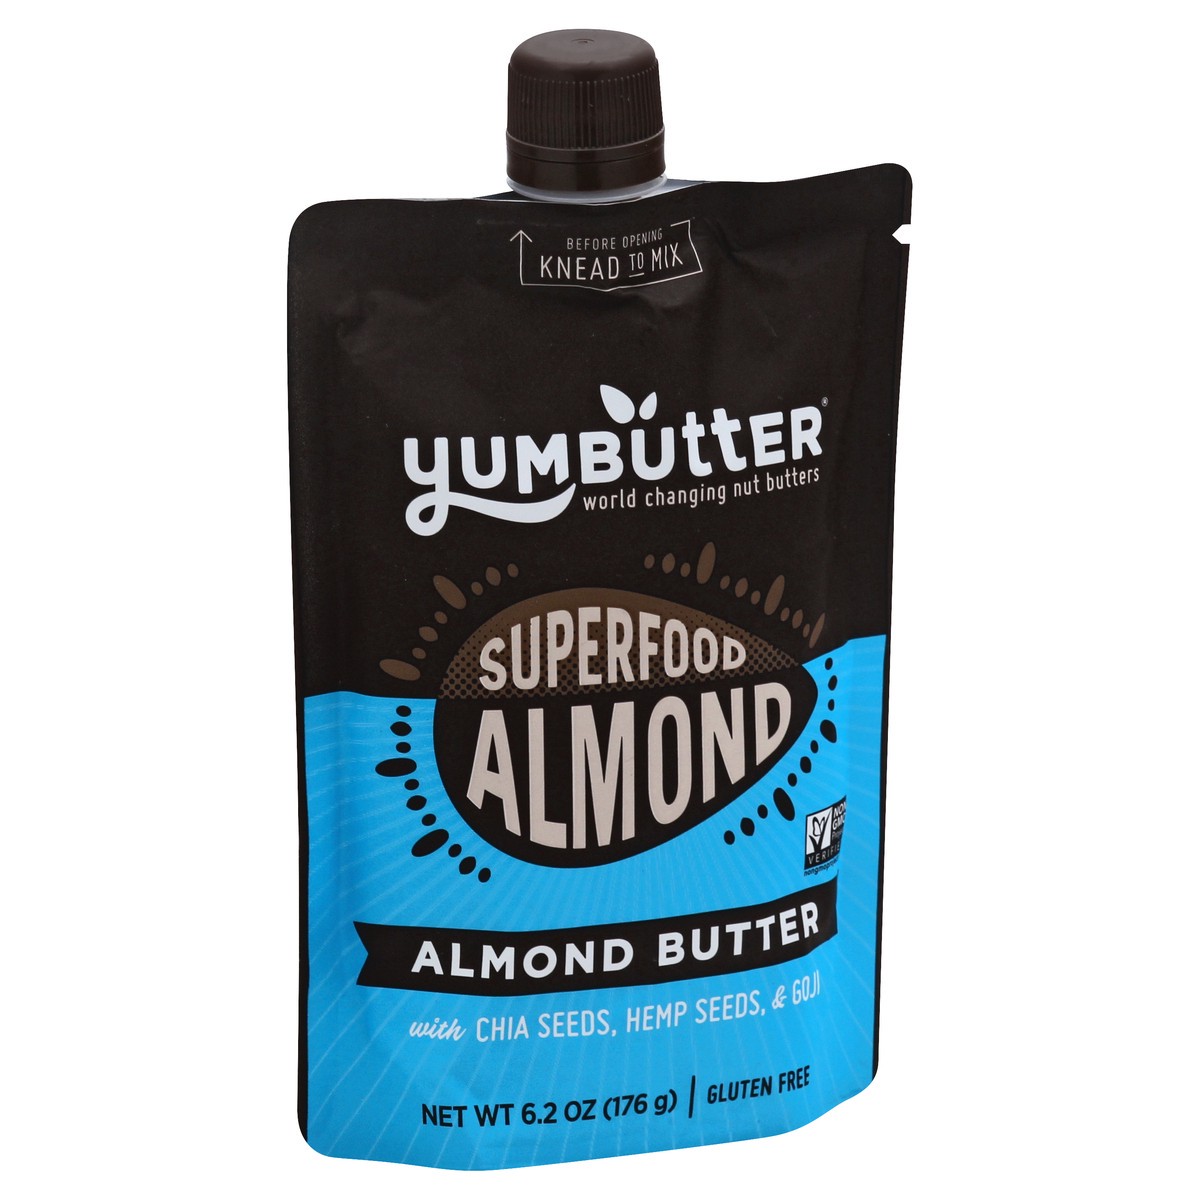 slide 10 of 13, YumButter Superfood Almond Almond Butter 6.2 oz, 6.2 oz